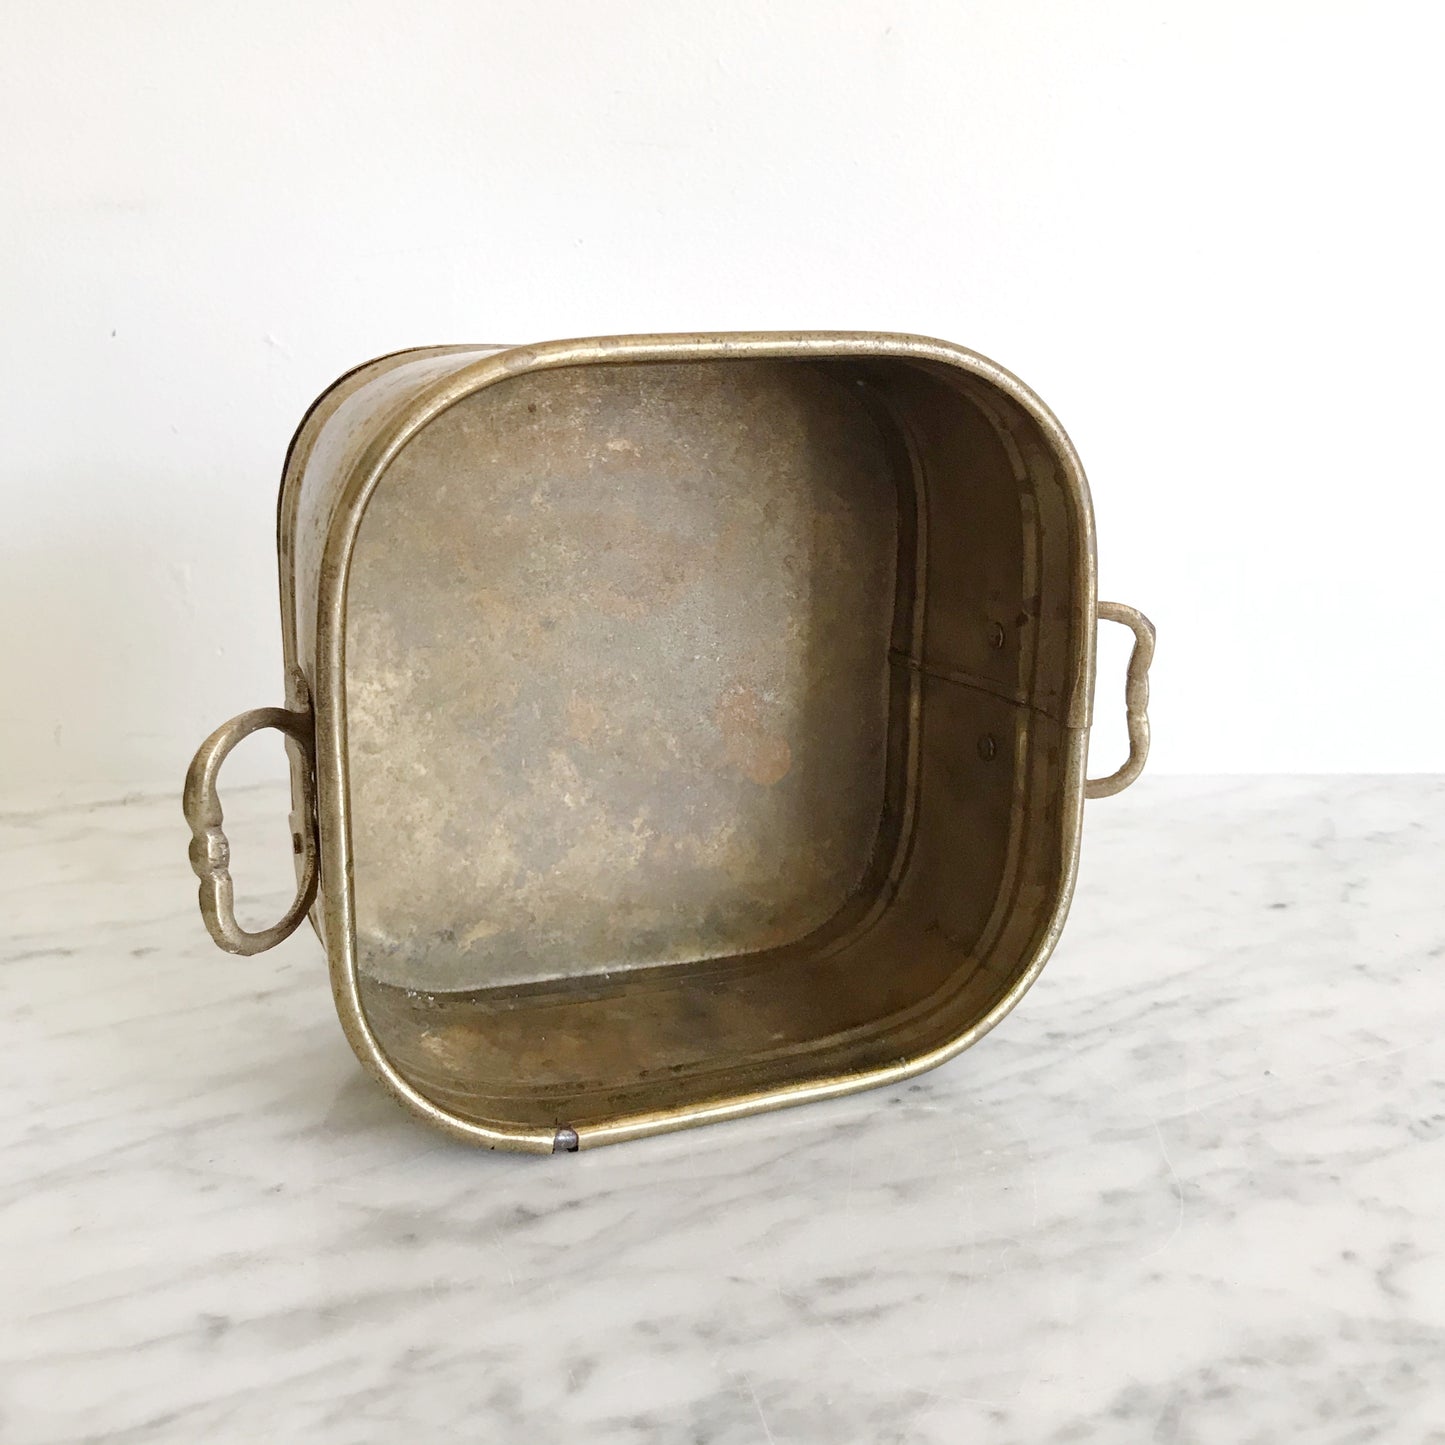 Vintage Square Brass Planter with Patina